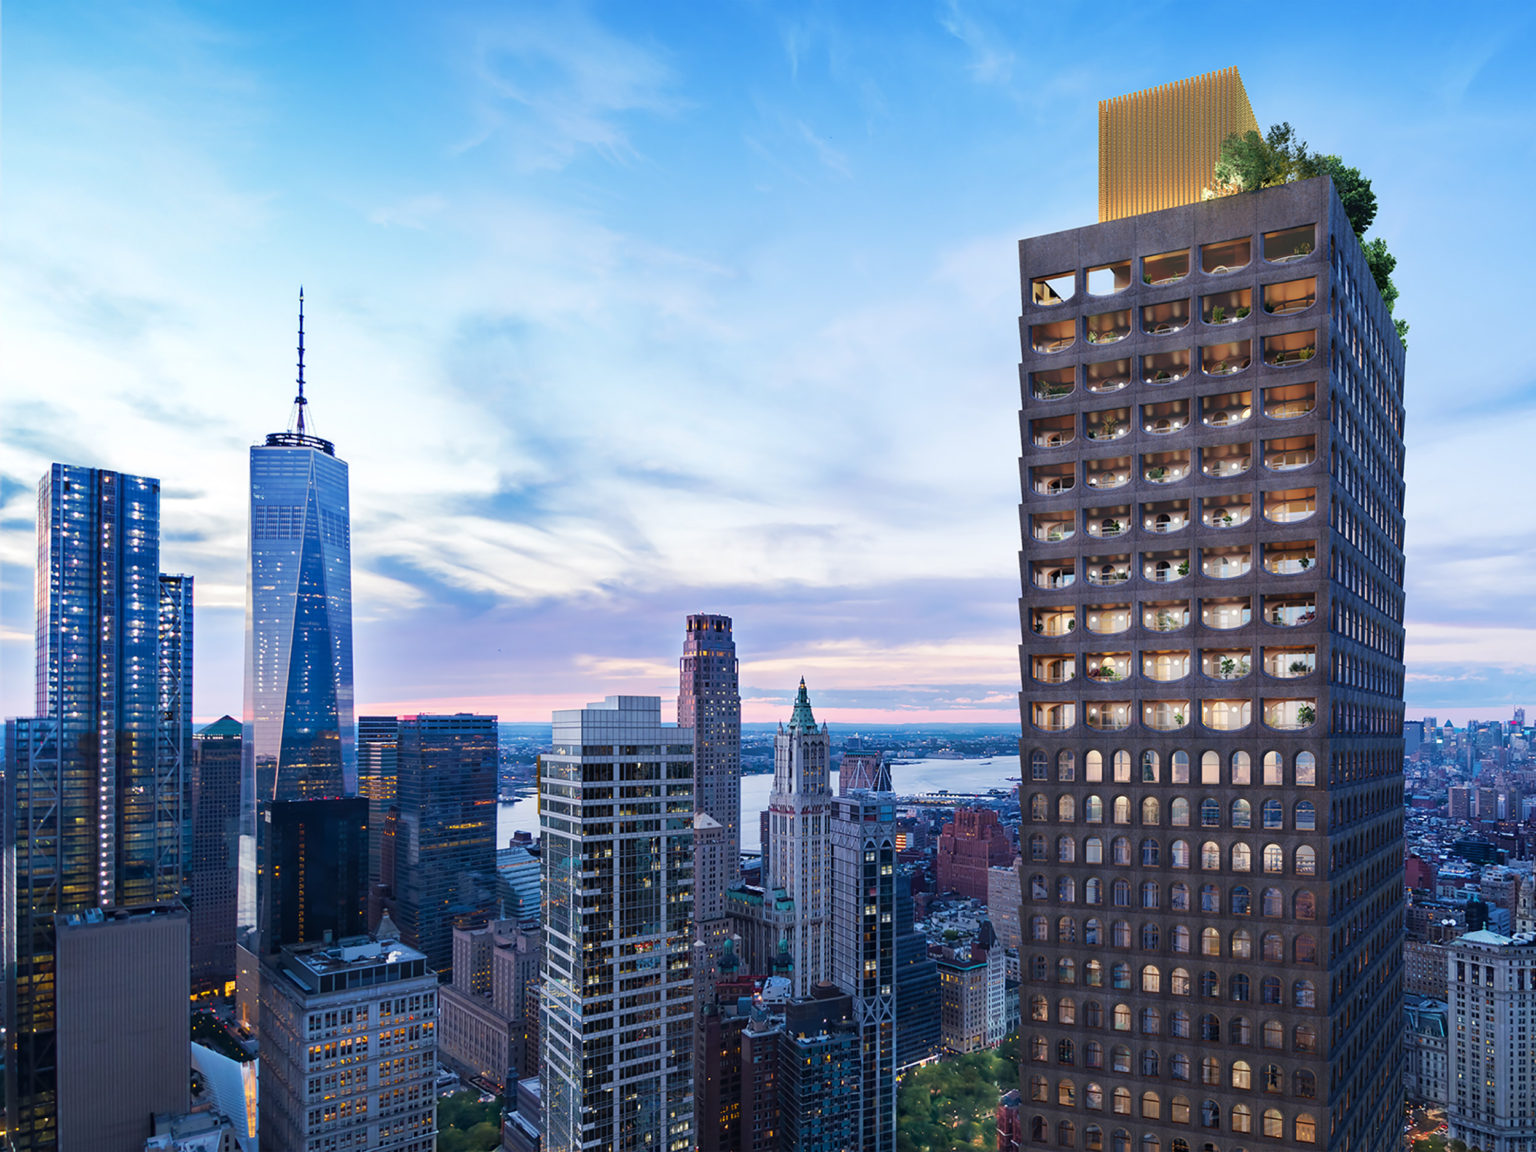 The 130 William development is located in New York City.